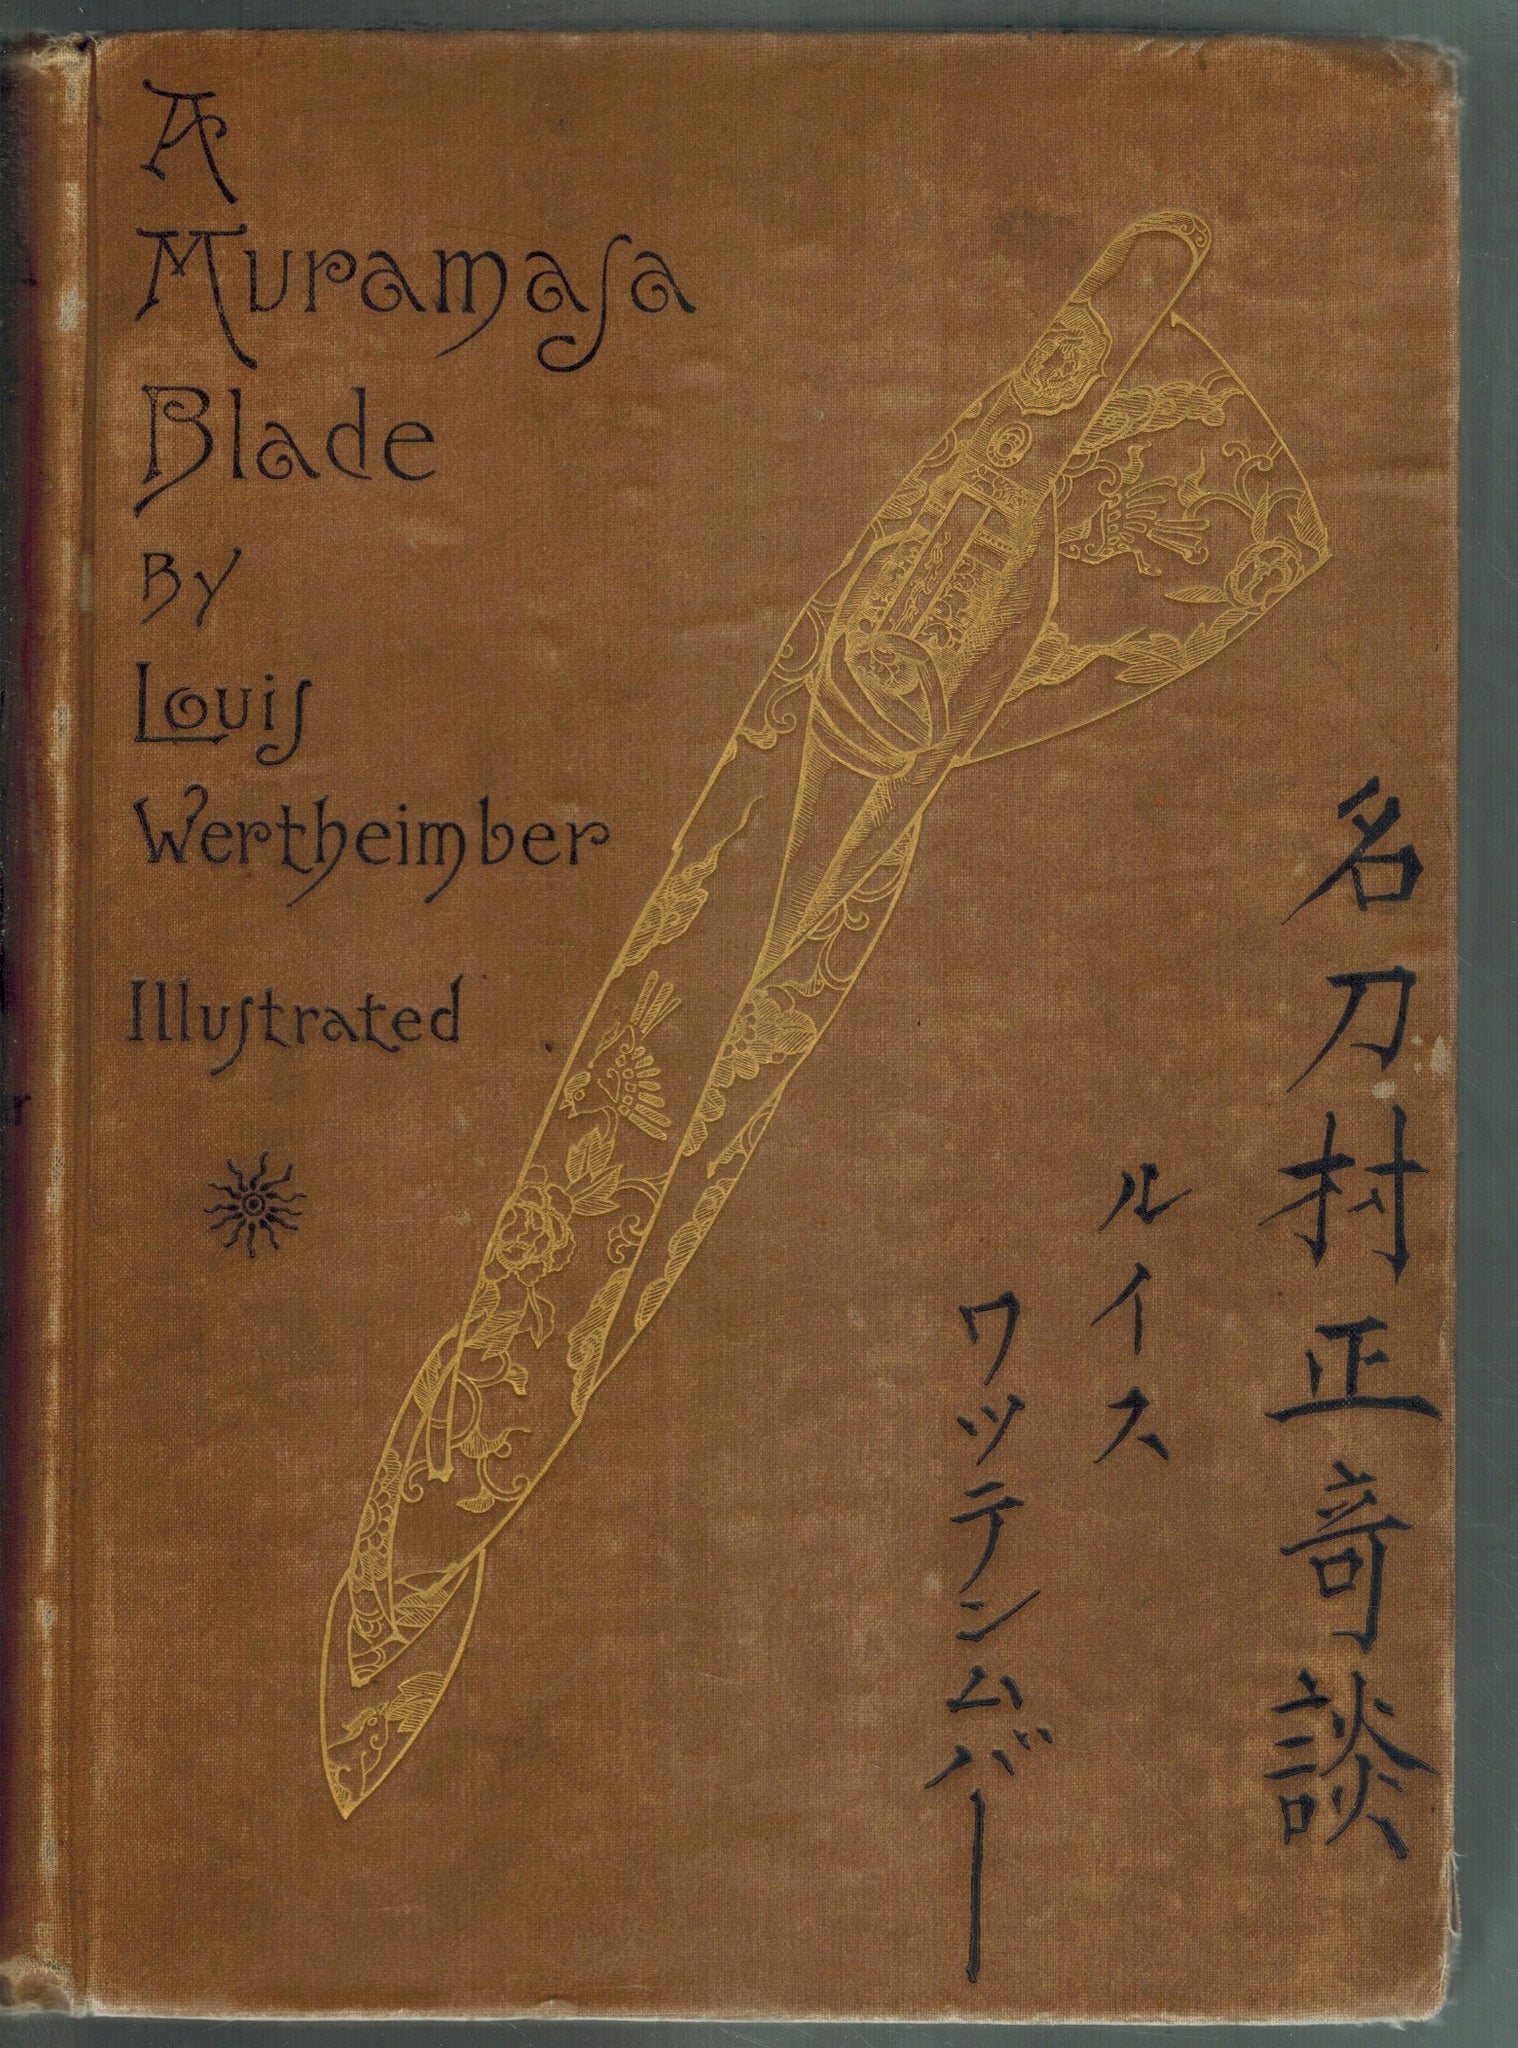 A MURAMASA BLADE: A STORY OF FEUDALISM IN OLD JAPAN  by Wertheimber, Louis